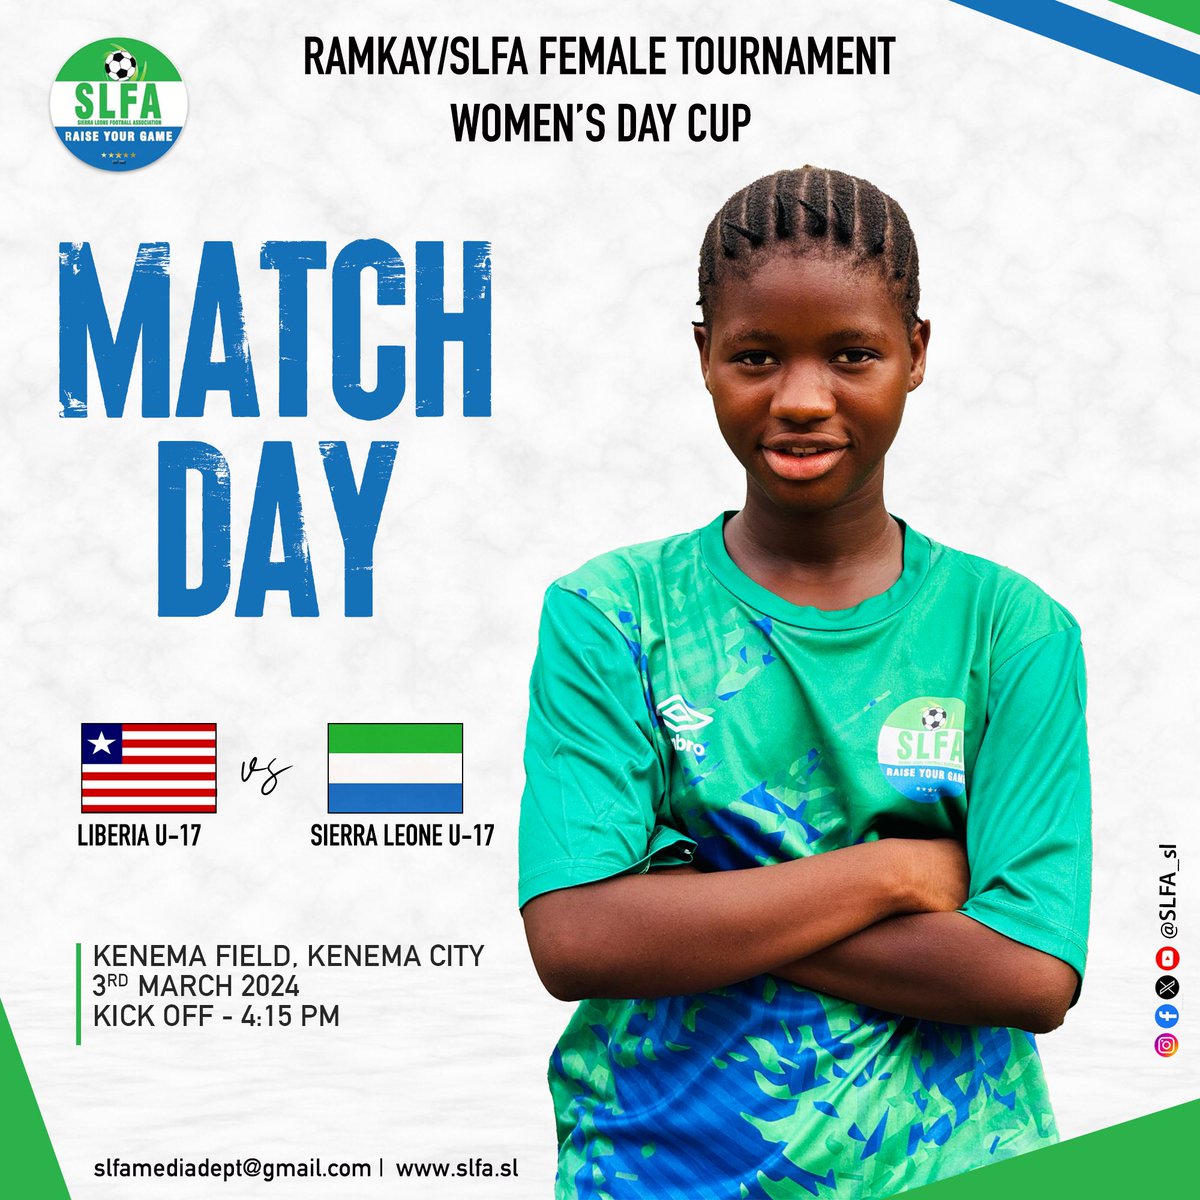 Sierra Leone U-17 takes on Liberia in the Women’s Day Cup today! Let's celebrate the power of women in sports and cheer for our Girls. Good luck to the team🙌🏾 You can follow all the action live here on the official @SLFA_sl facebook page📺 #WomensDayCup #WomenInSports